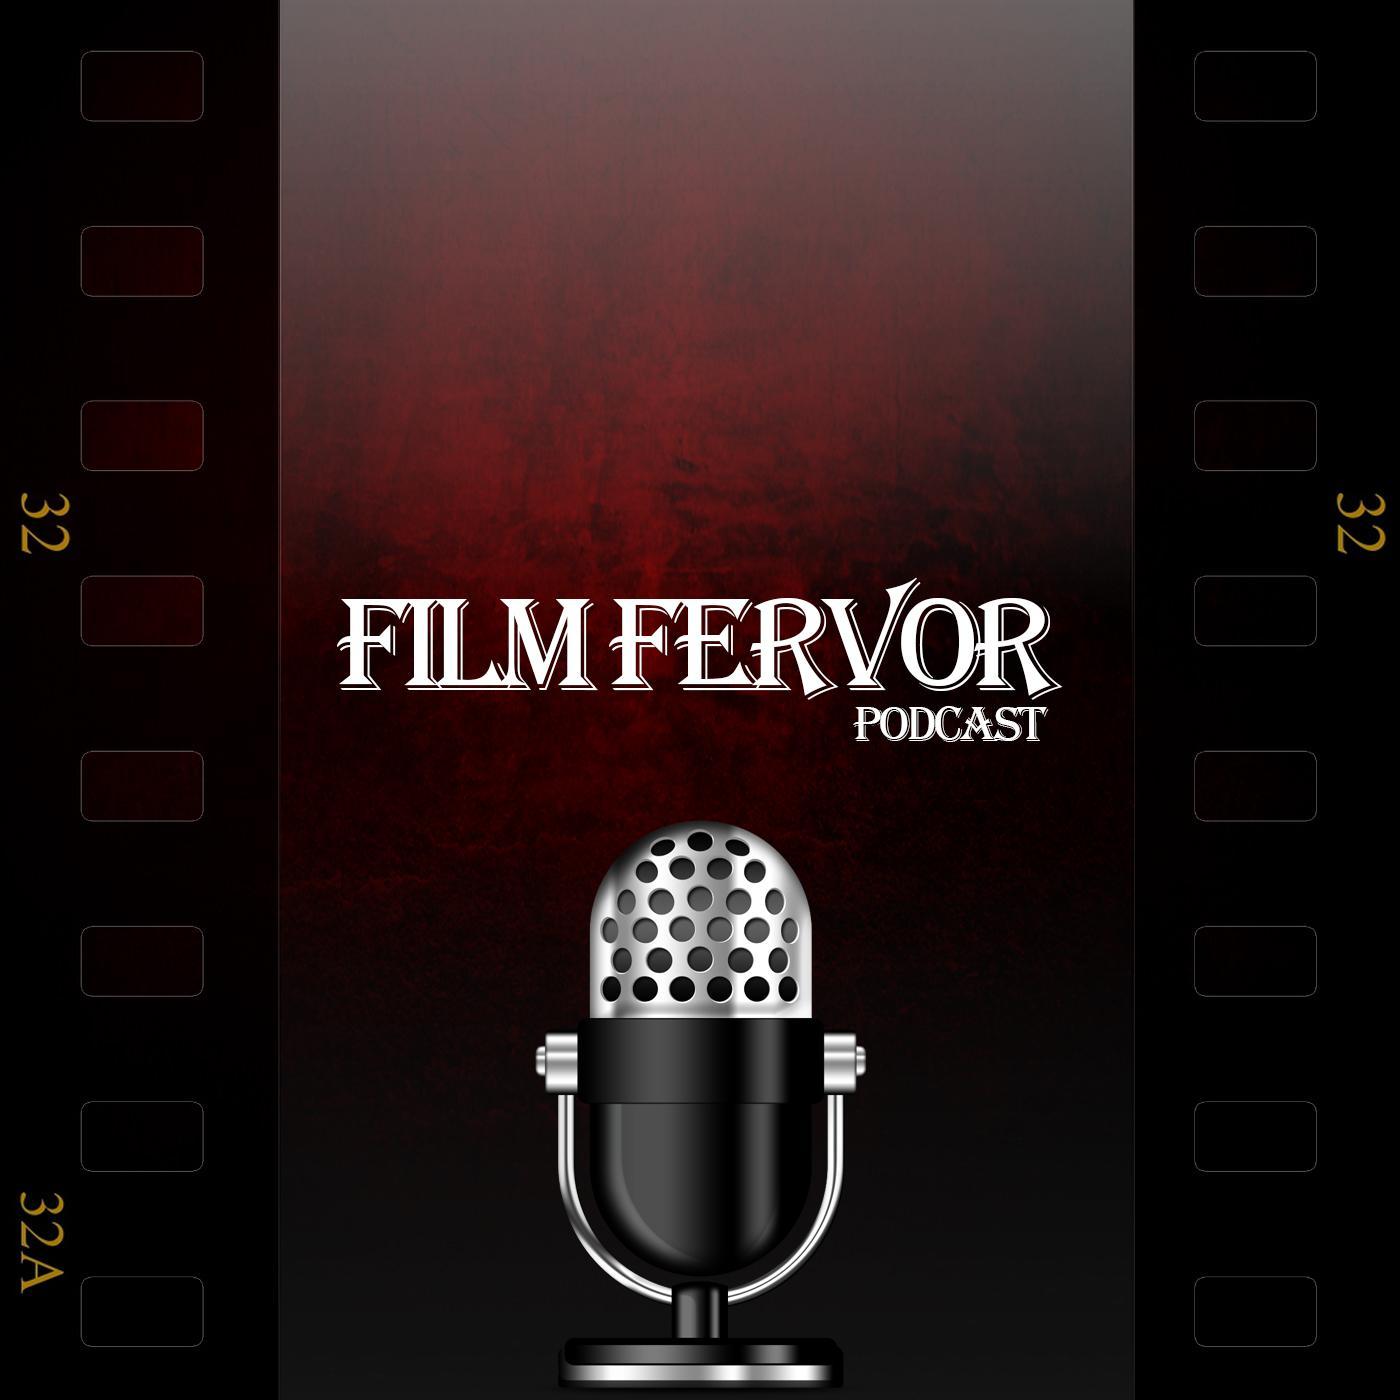 Podcasts and Reviews of Independent Films from around the world. #SupportIndieFilm #FilmTwitter

We didn't go to film school. We went to Films.